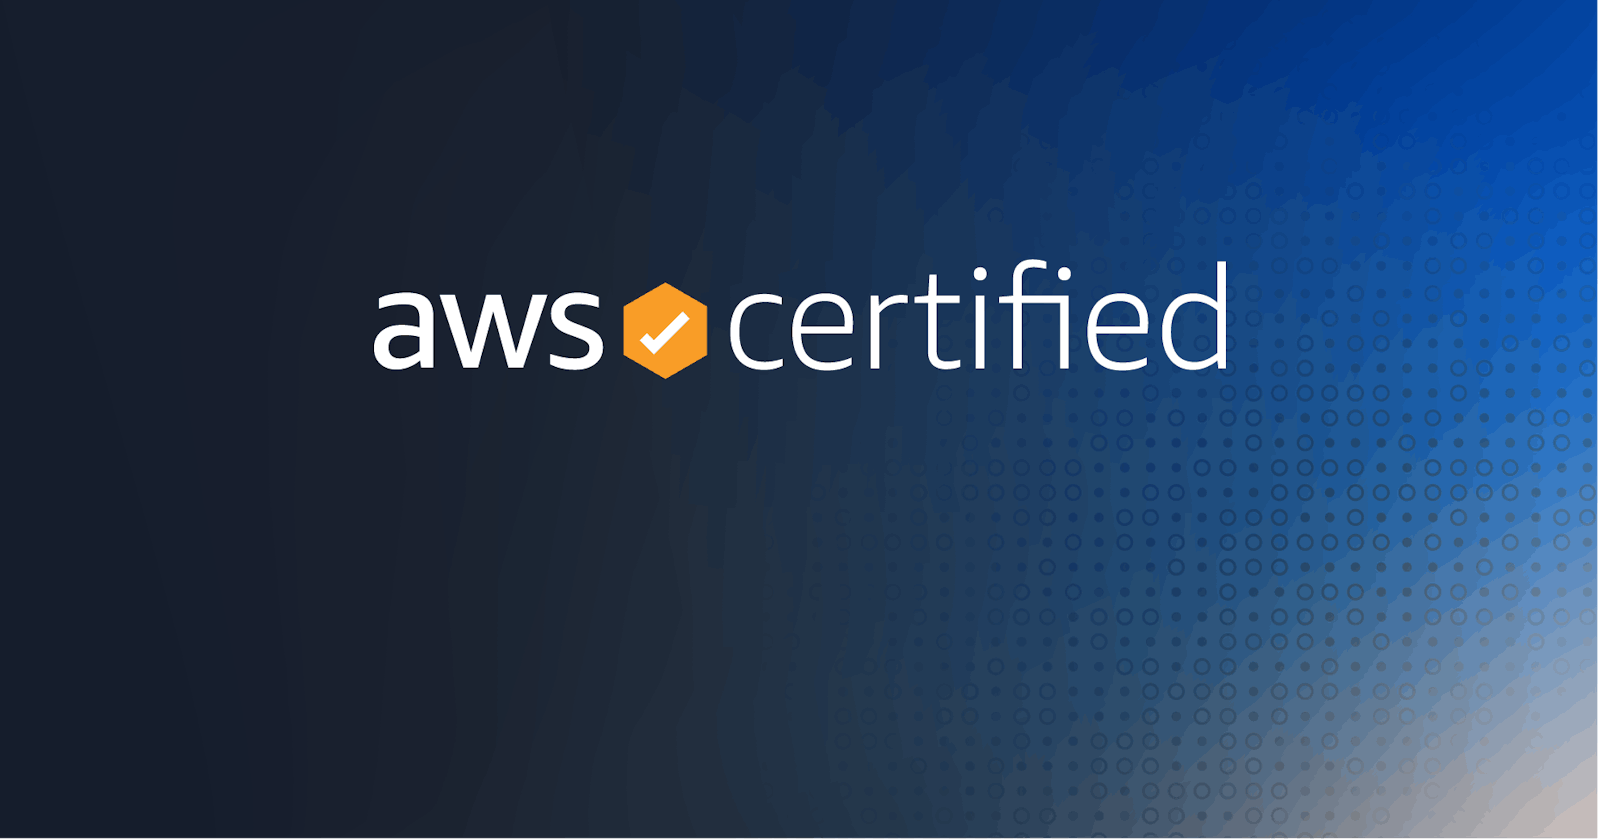 Does AWS offer certification exam vouchers? 
                          If yes, how can I get one?